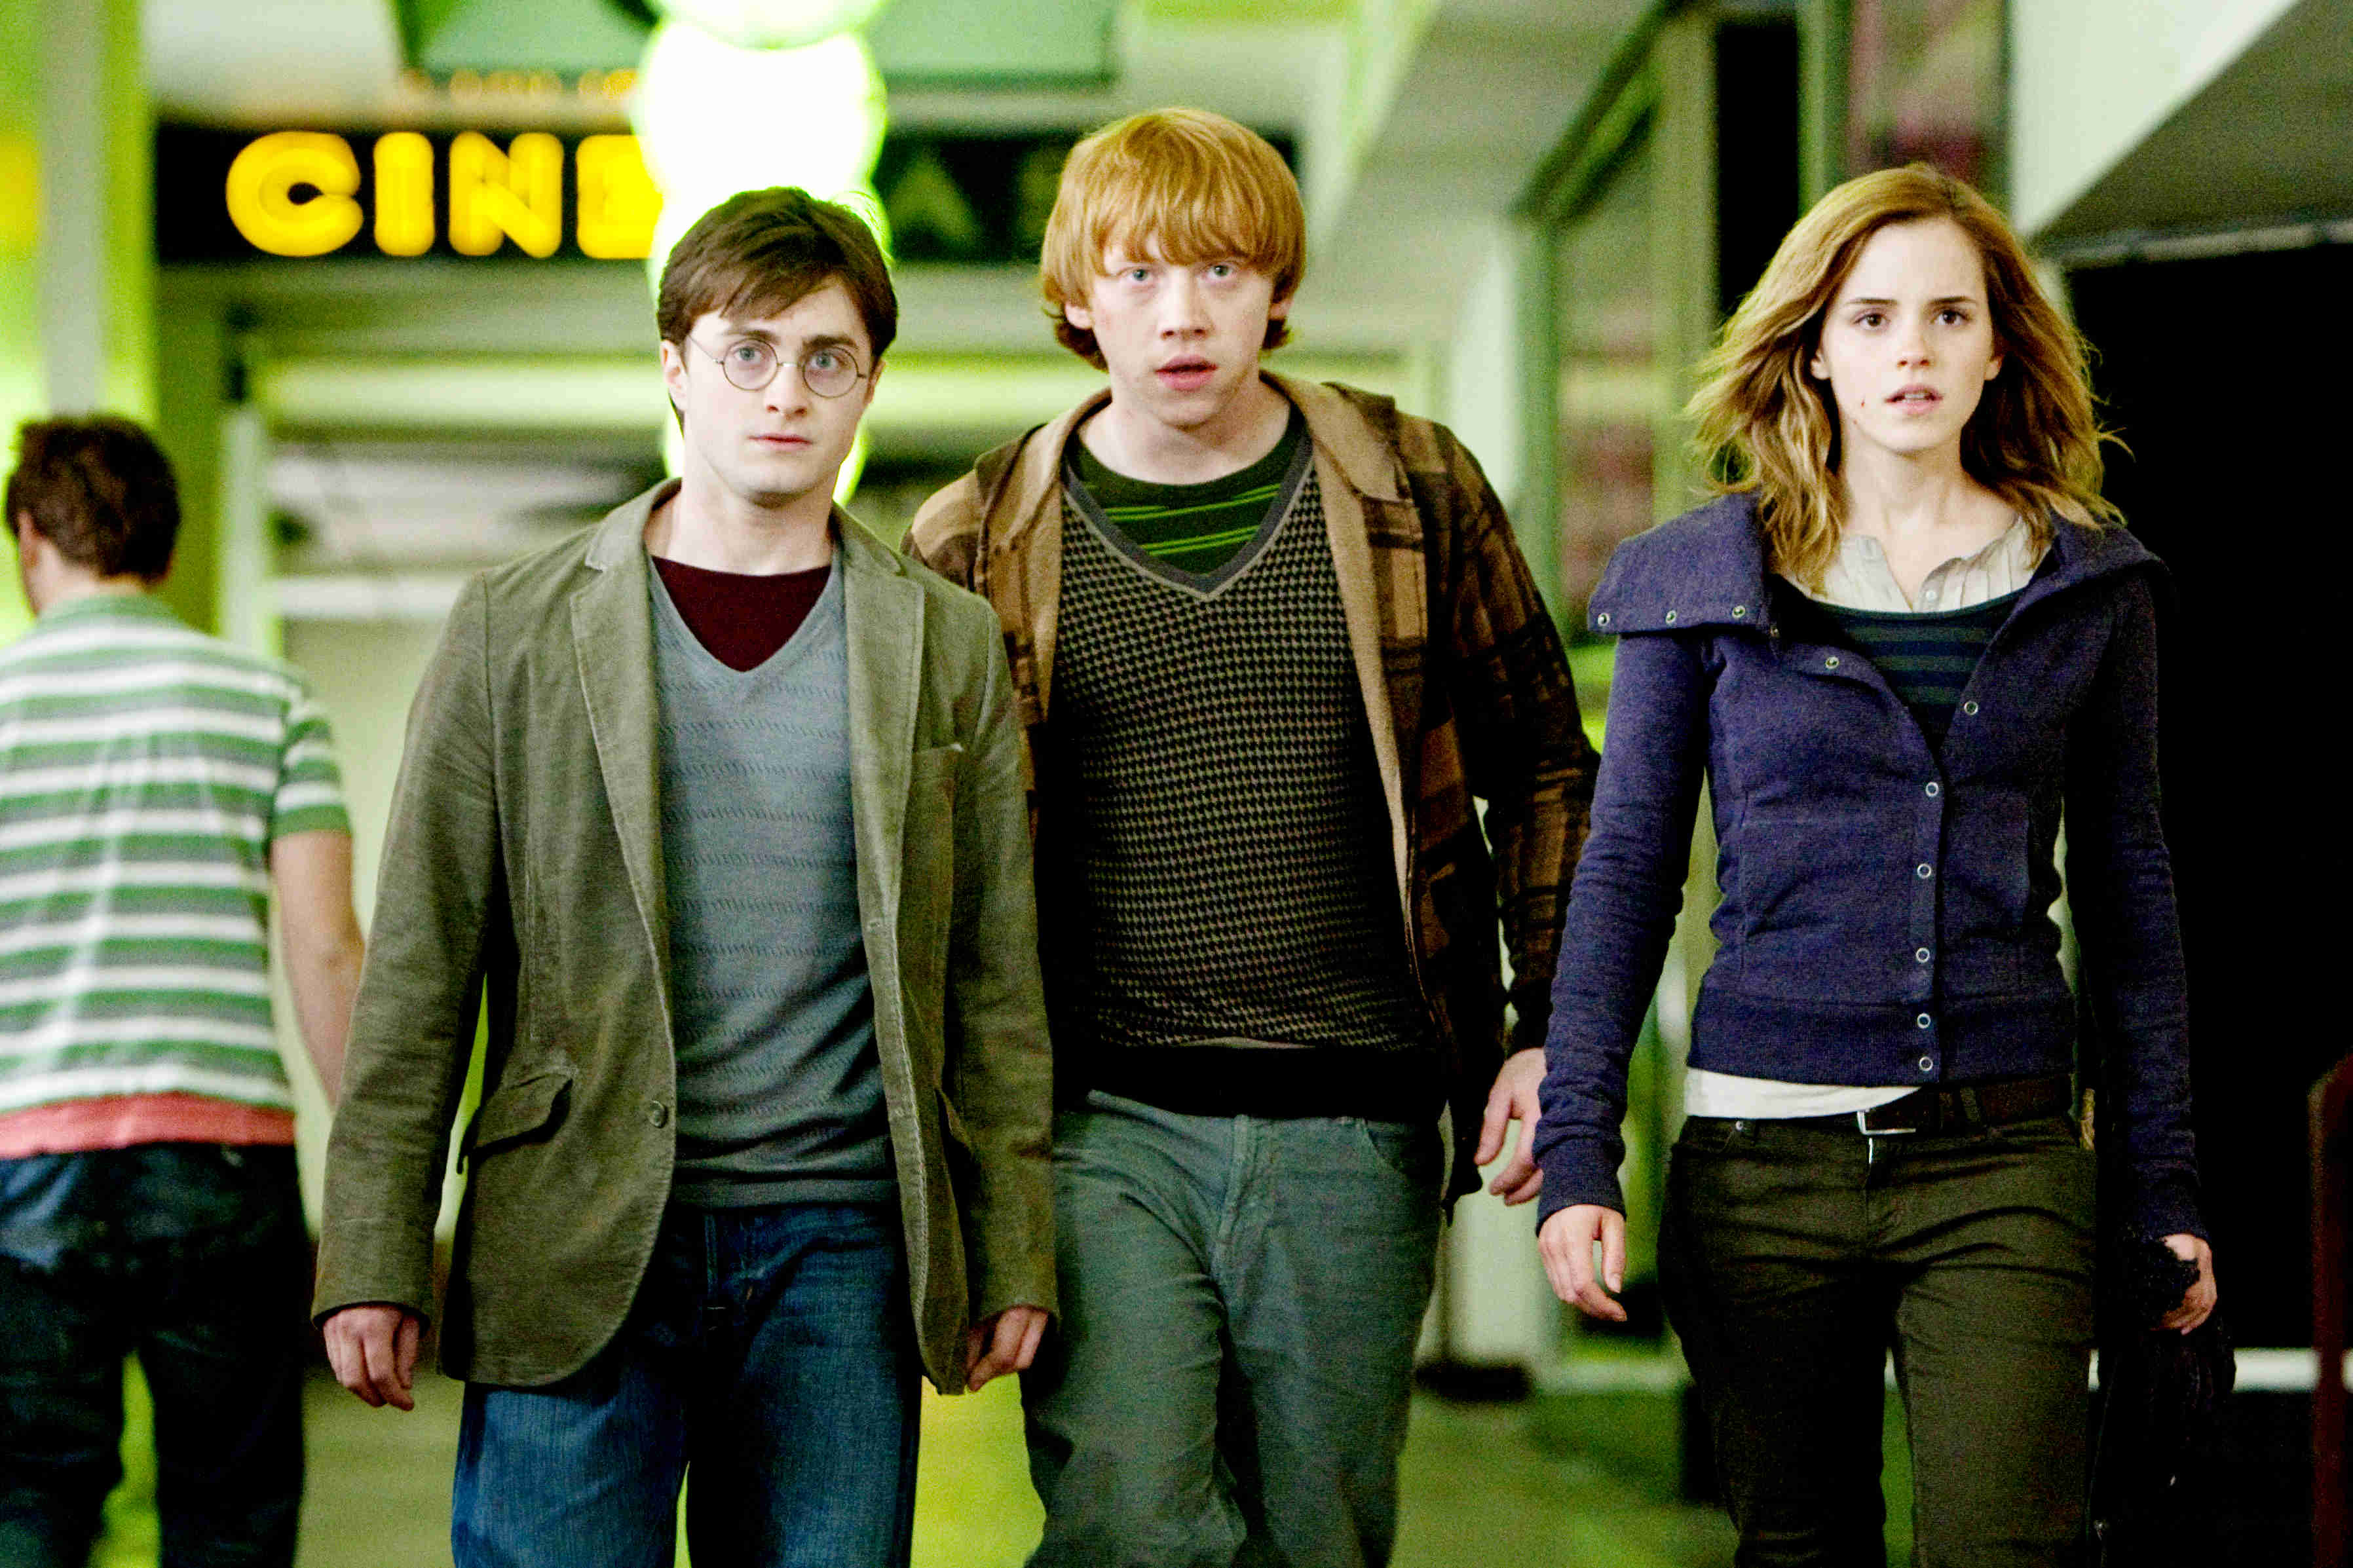 Daniel Radcliffe, Rupert Grint and Emma Watson in Warner Bros. Pictures' Harry Potter and the Deathly Hallows: Part I (2010). Photo credit by Jaap Buitendijk.